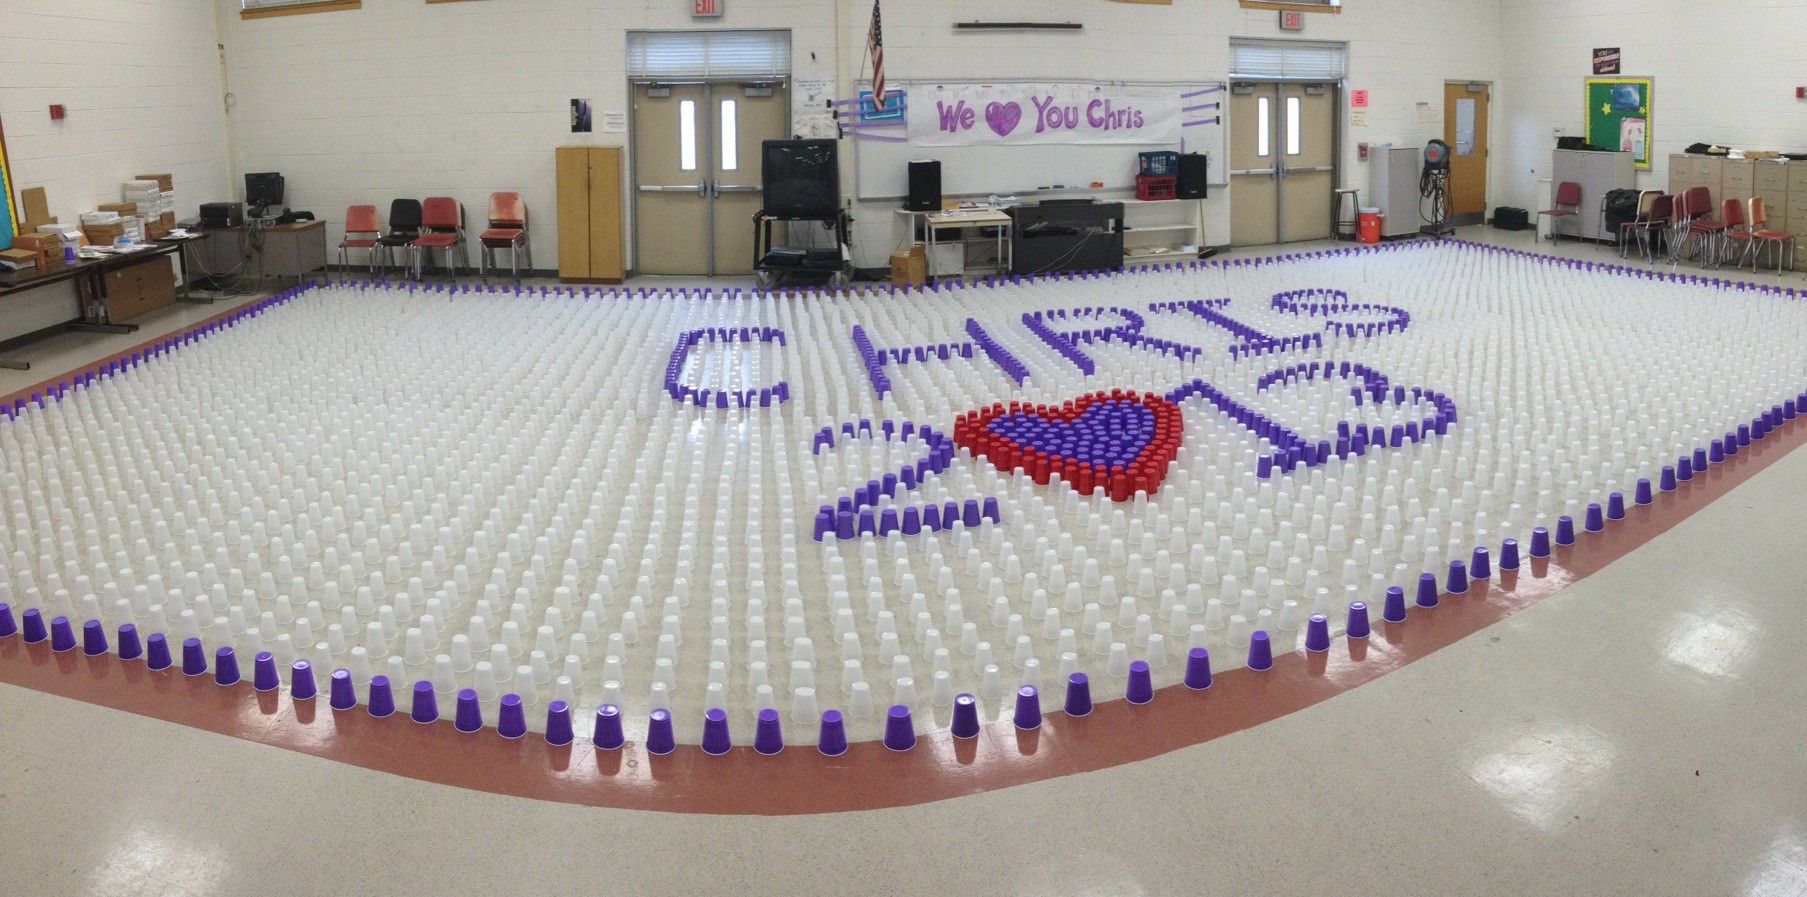 Students used cups to create a tribute to Chris Schroeder in South High’s chorus room after his death.